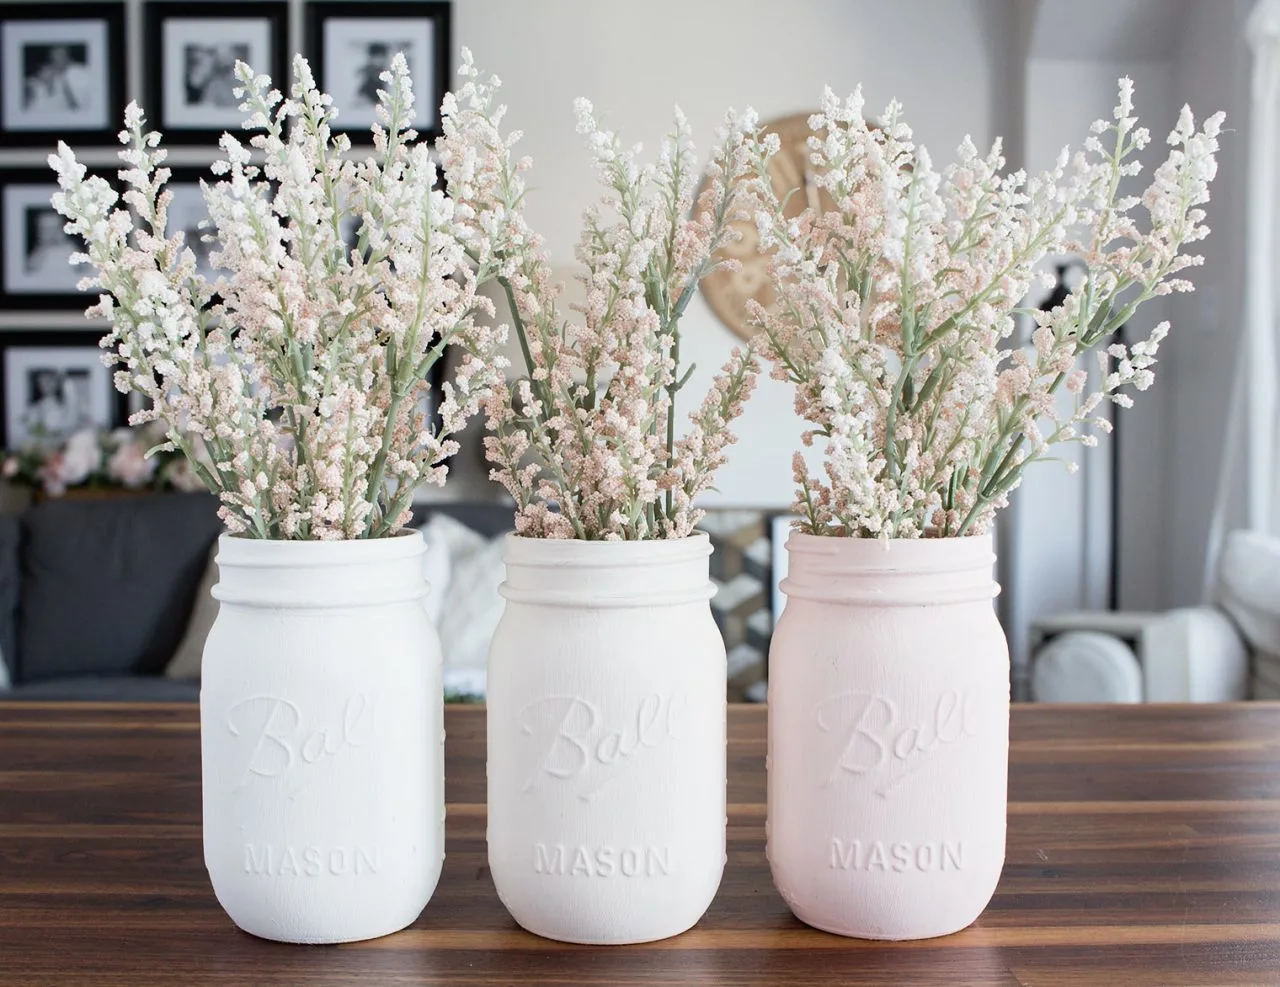 Mason jar vases painted white, cream and light pink with flowers.